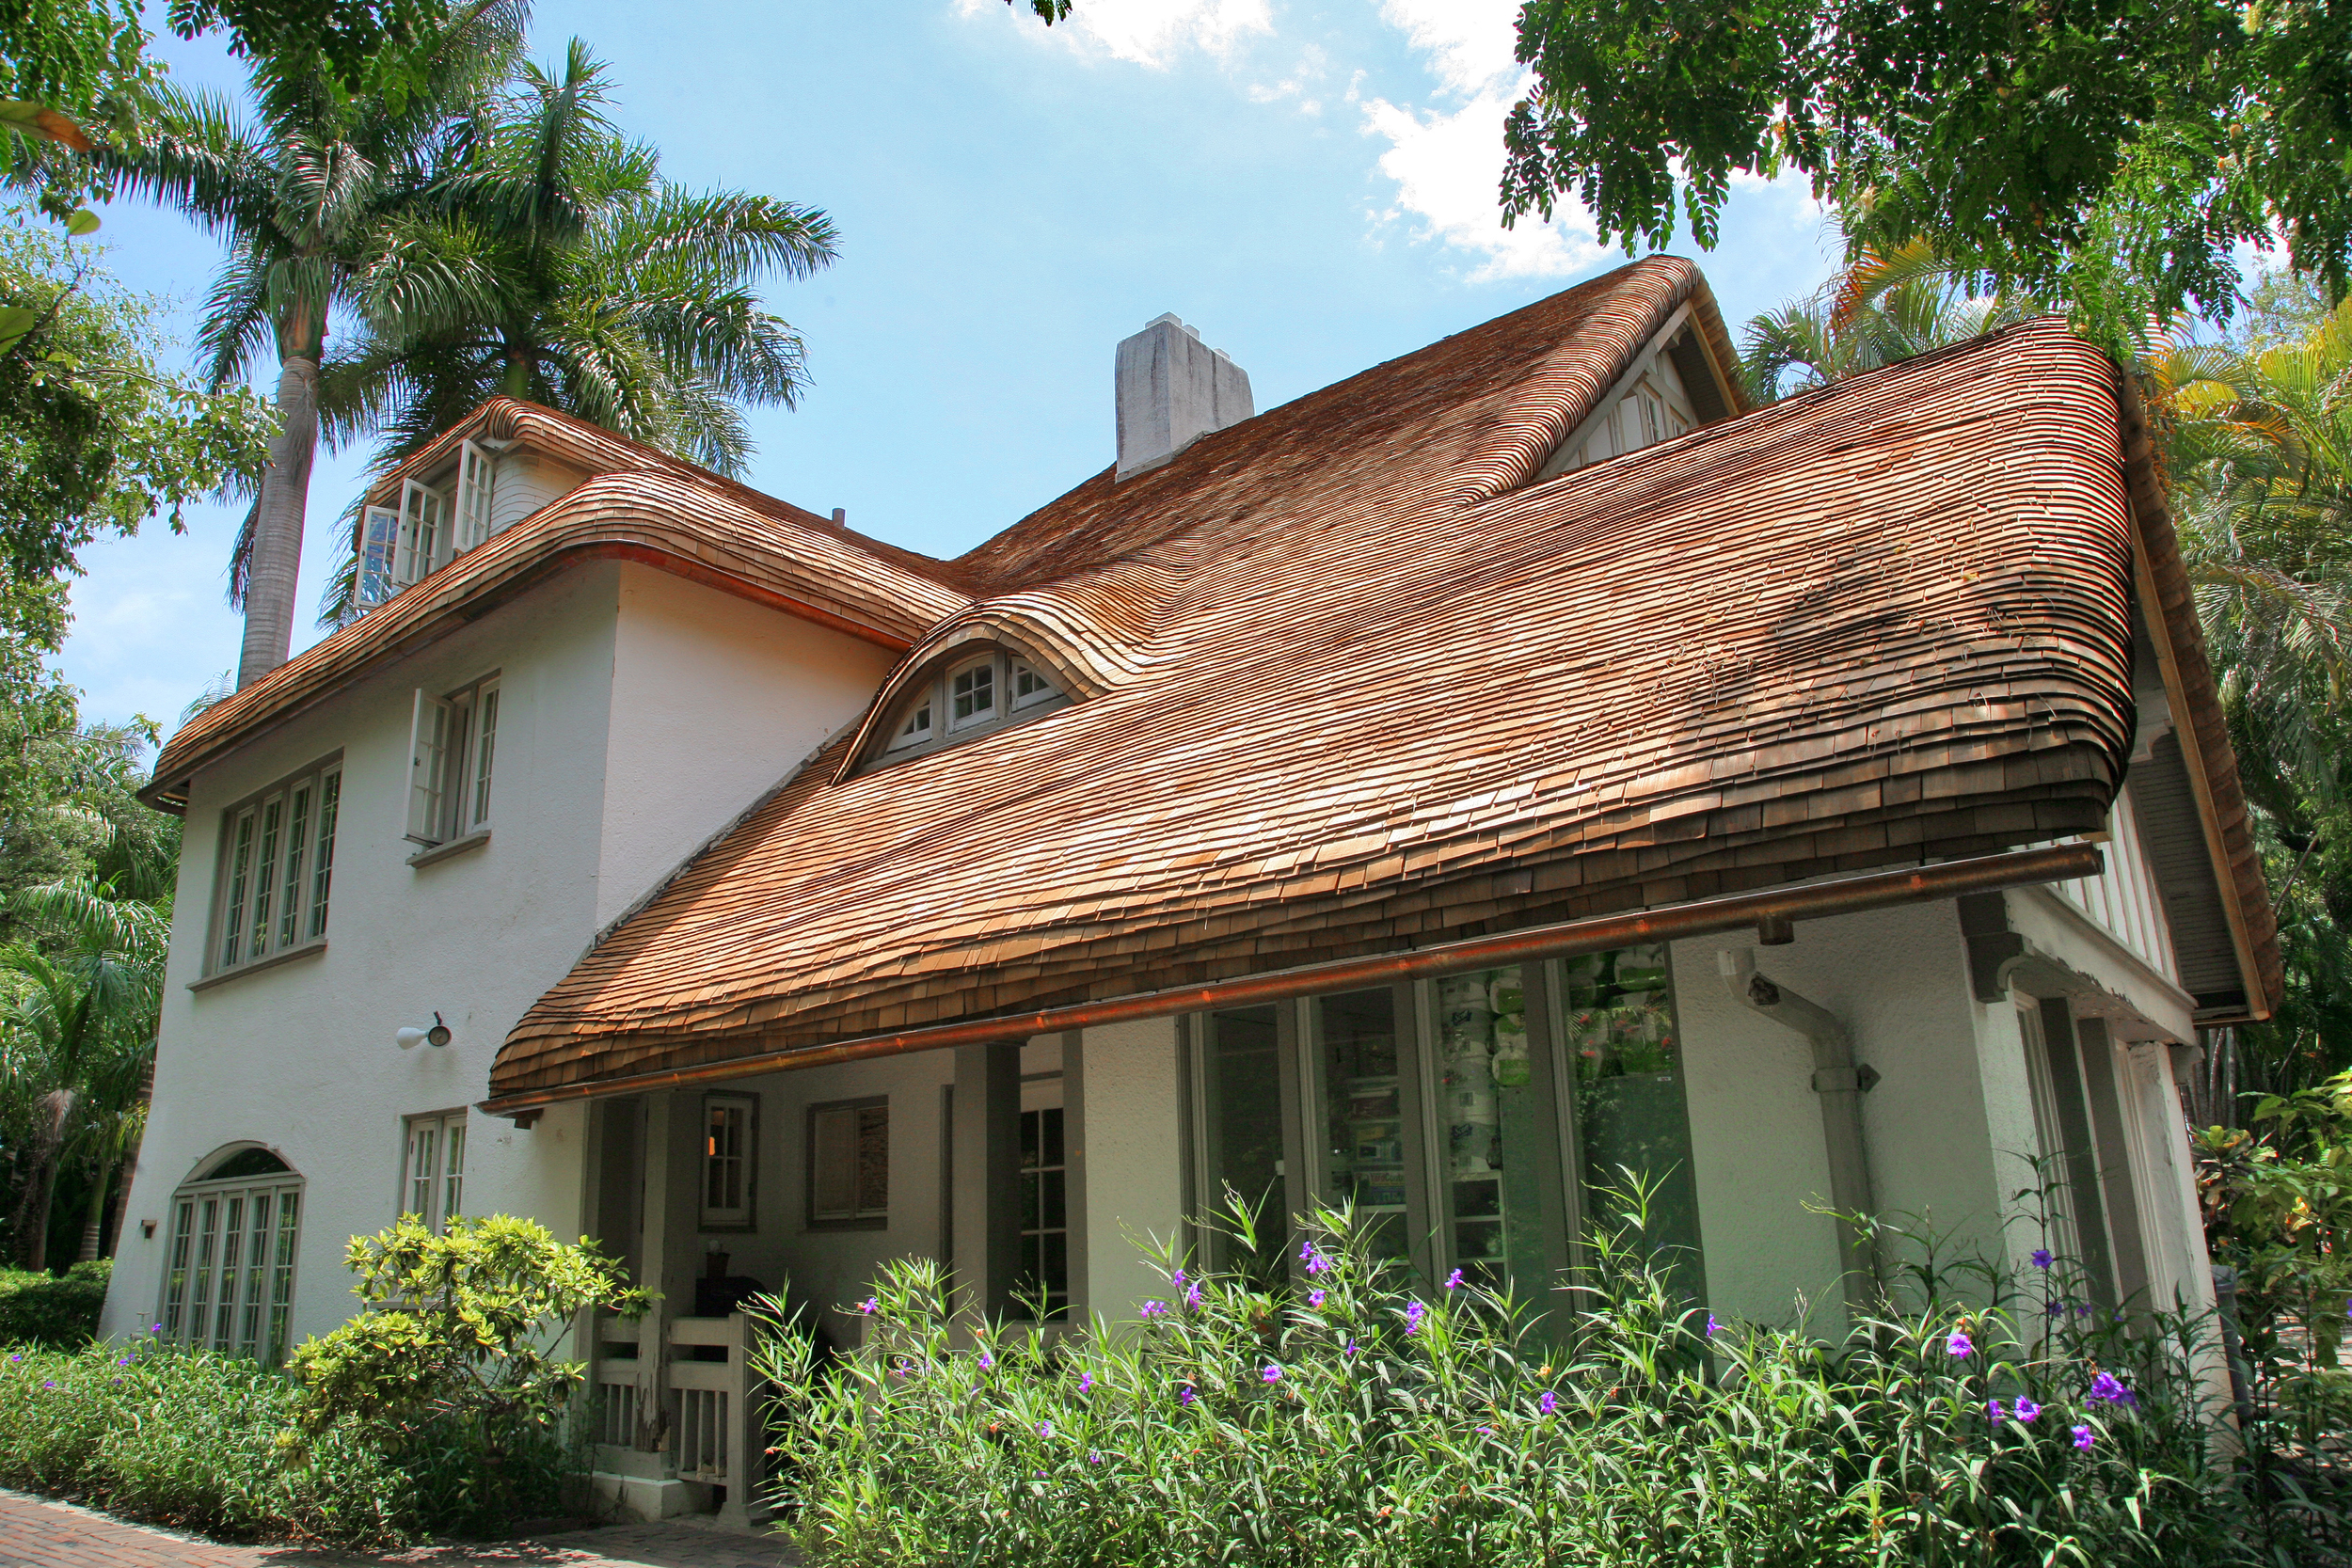 Historical-Cottage-Roof-Coconut-Grove,-FL-(3) copy.jpg